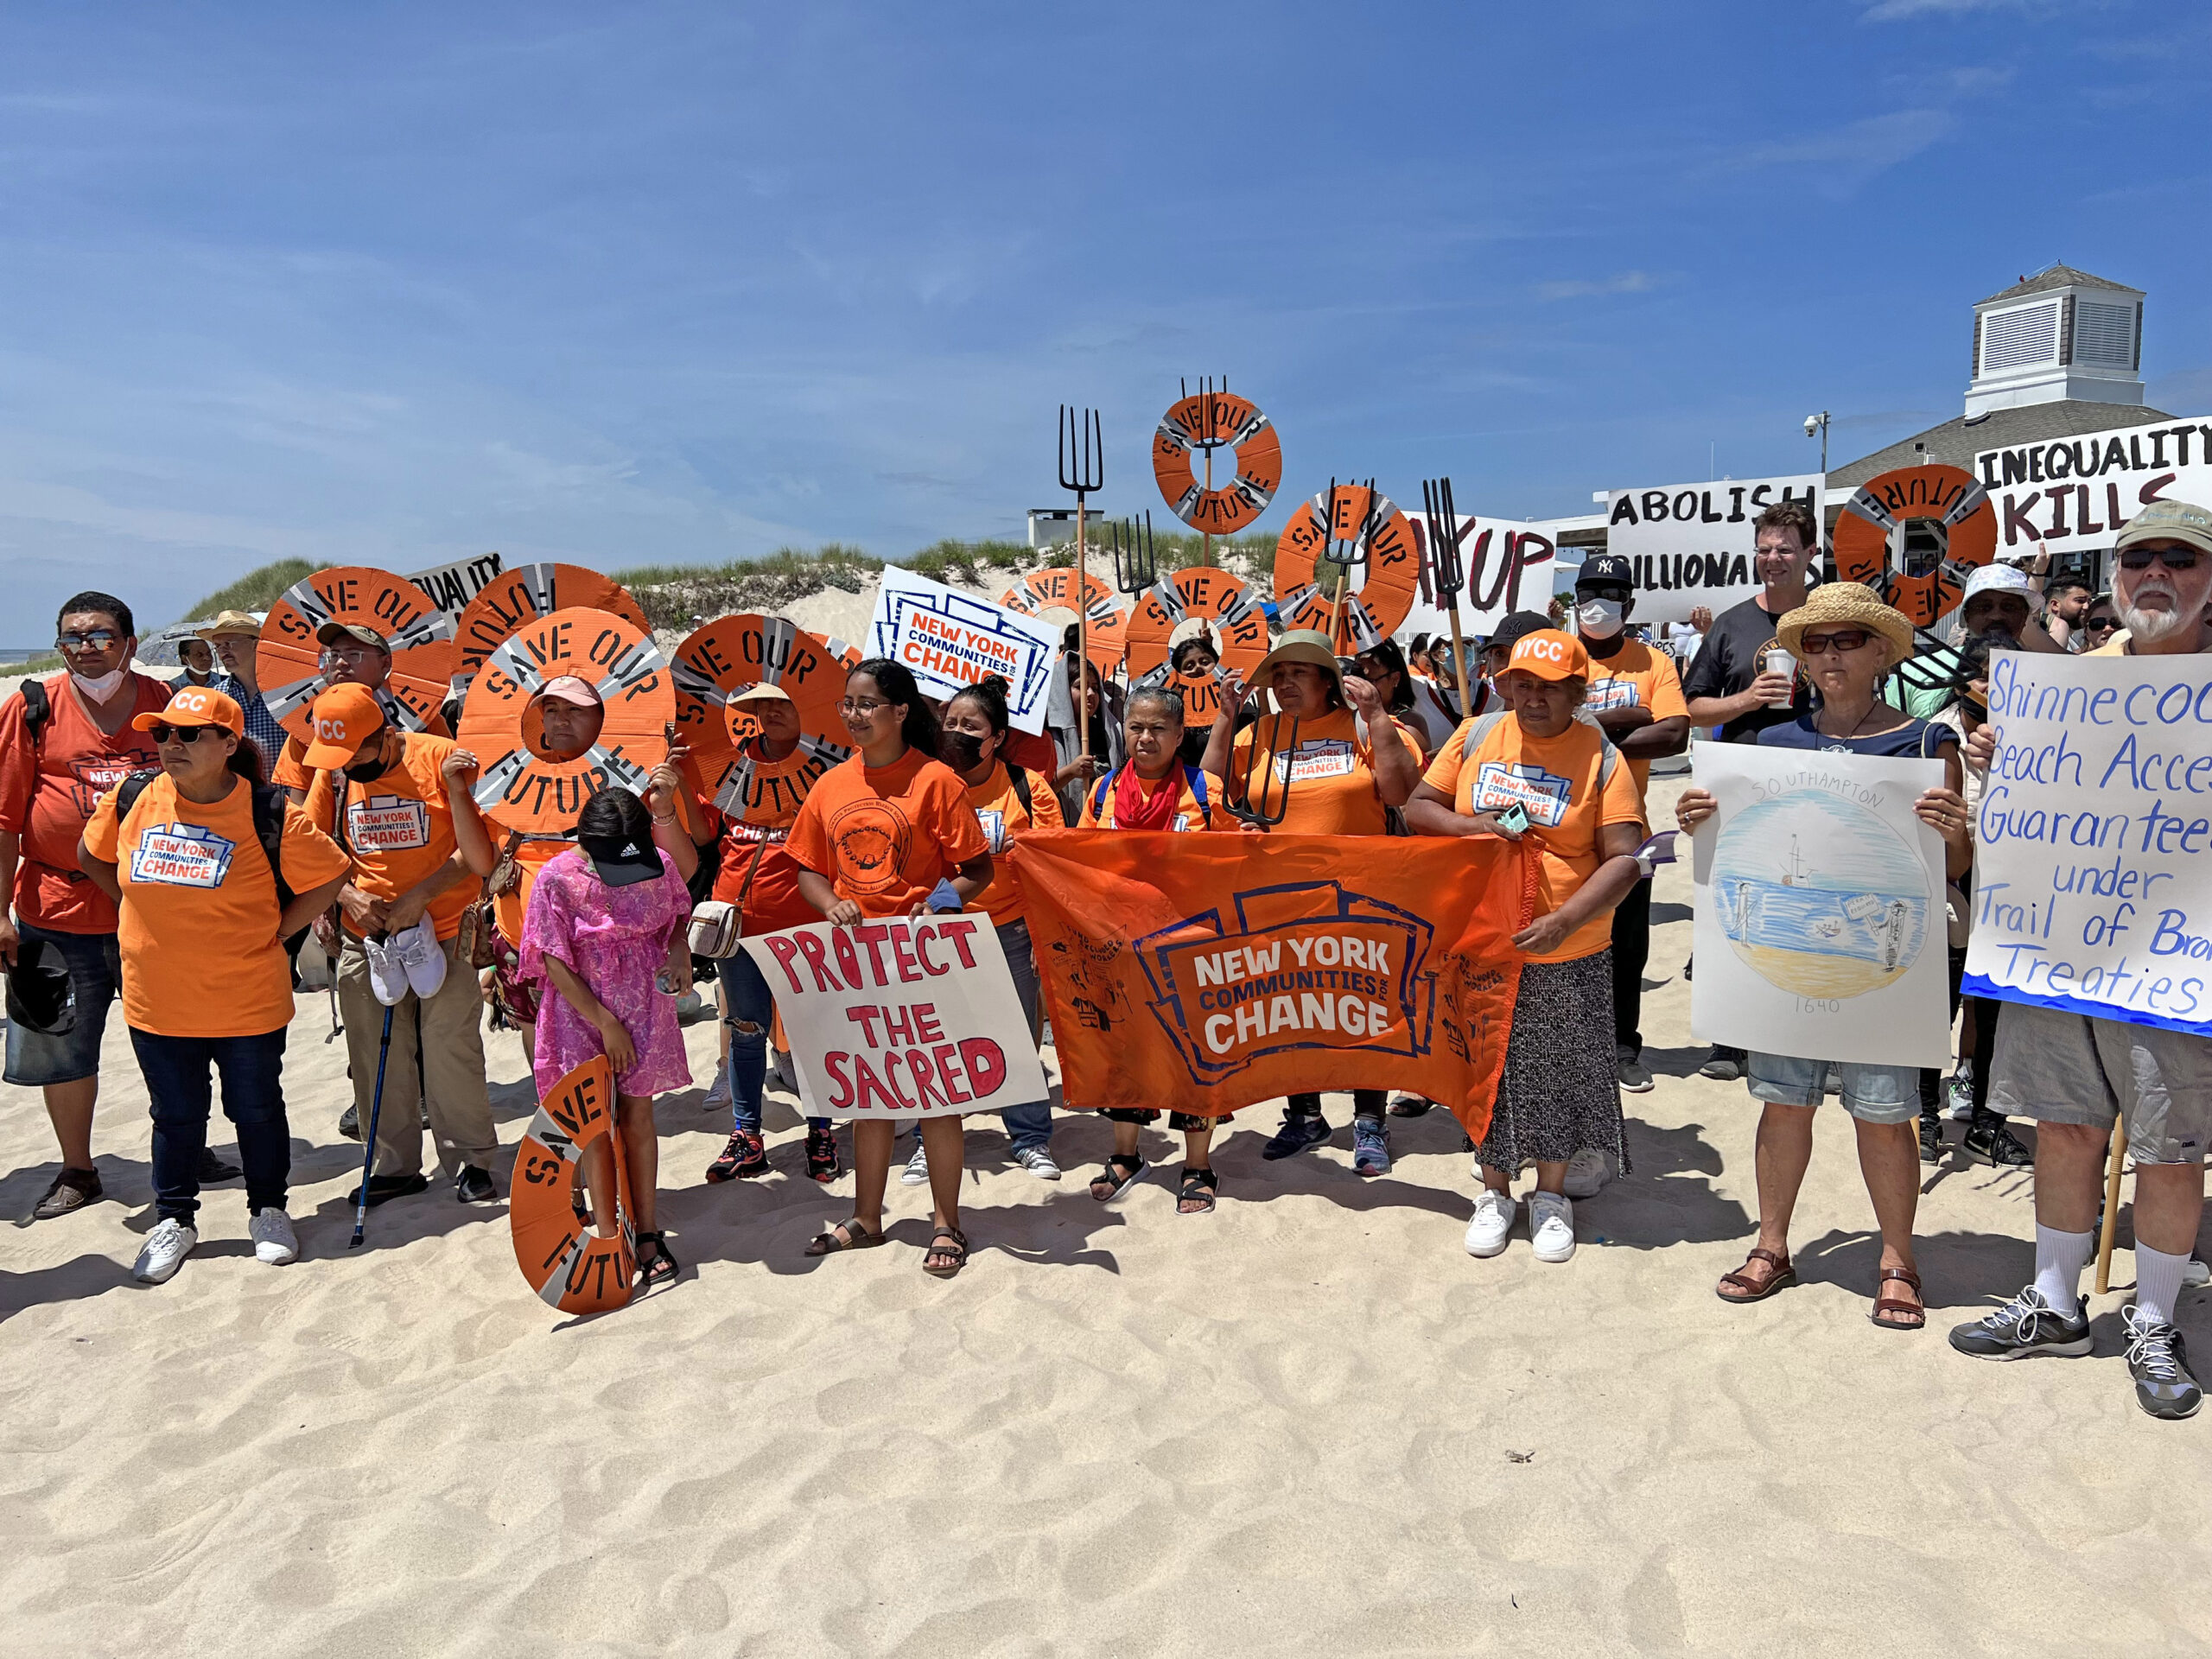 Members of the Shinnecock Nation hosted a #beachback protest at Coopers Beach last month.